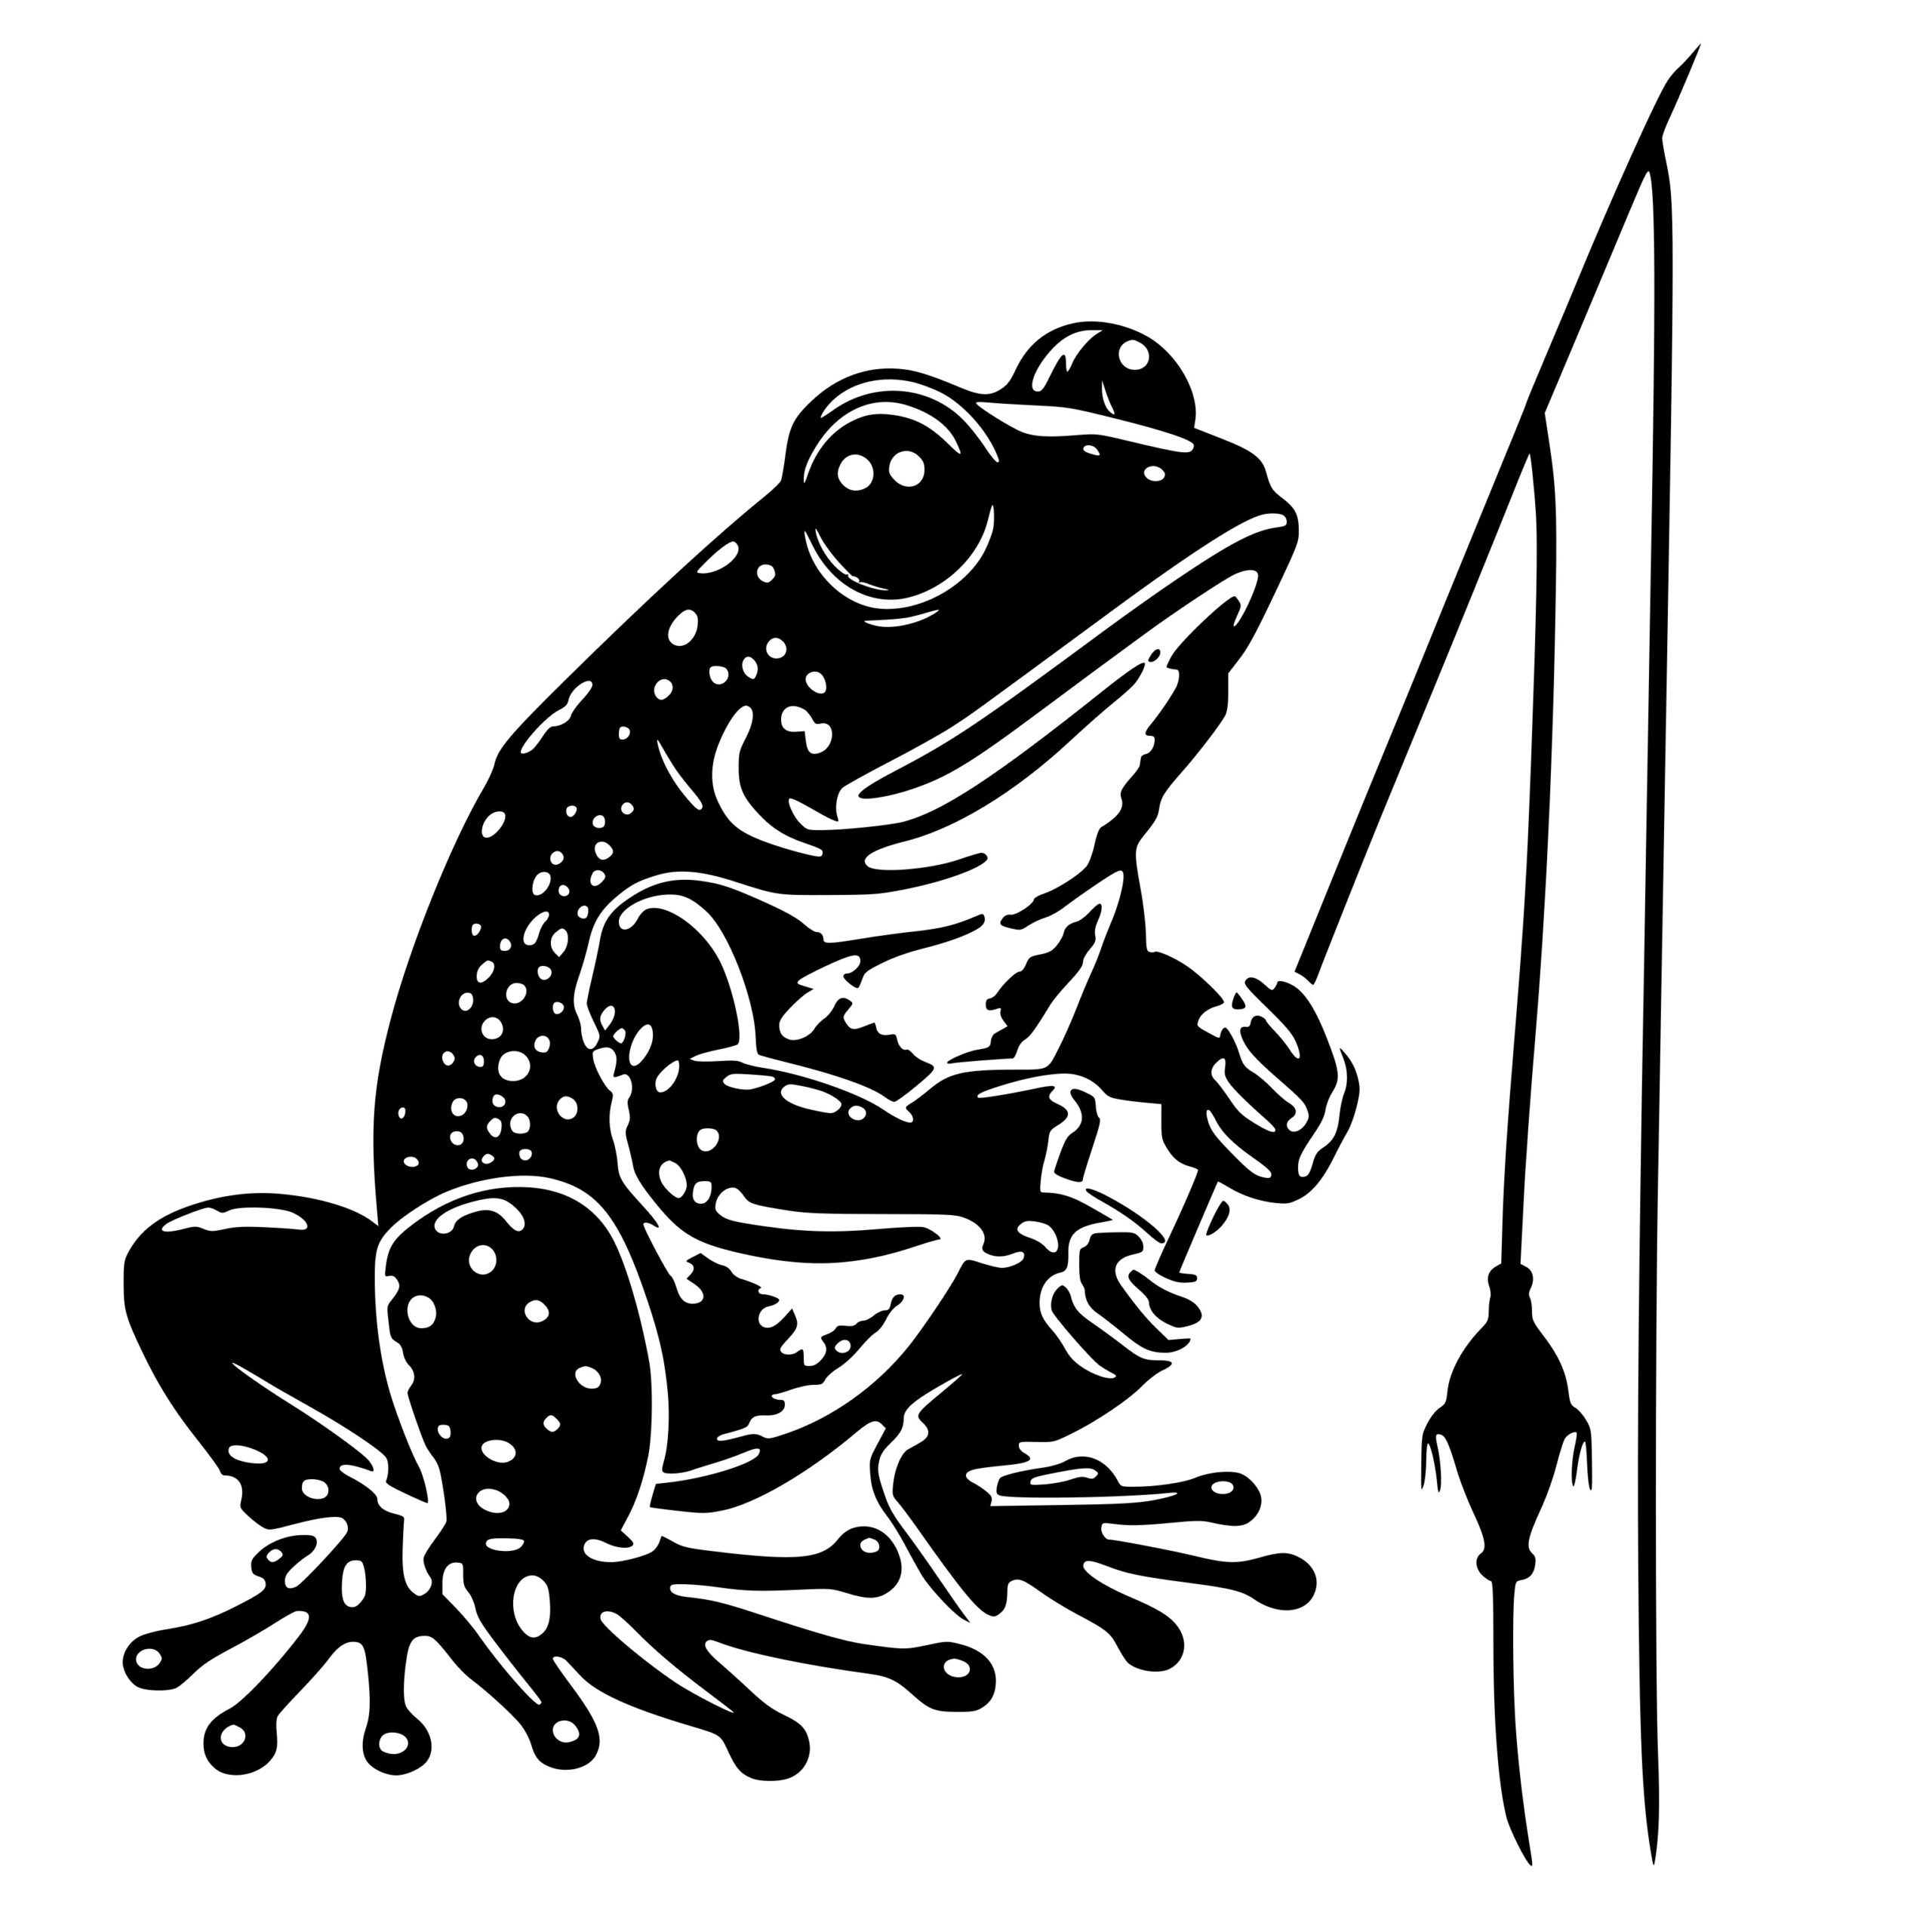 https://creativemeadow.com/wp-content/uploads/2023/01/261_Frog_holding_a_fishing_rod_8941-scaled.jpeg